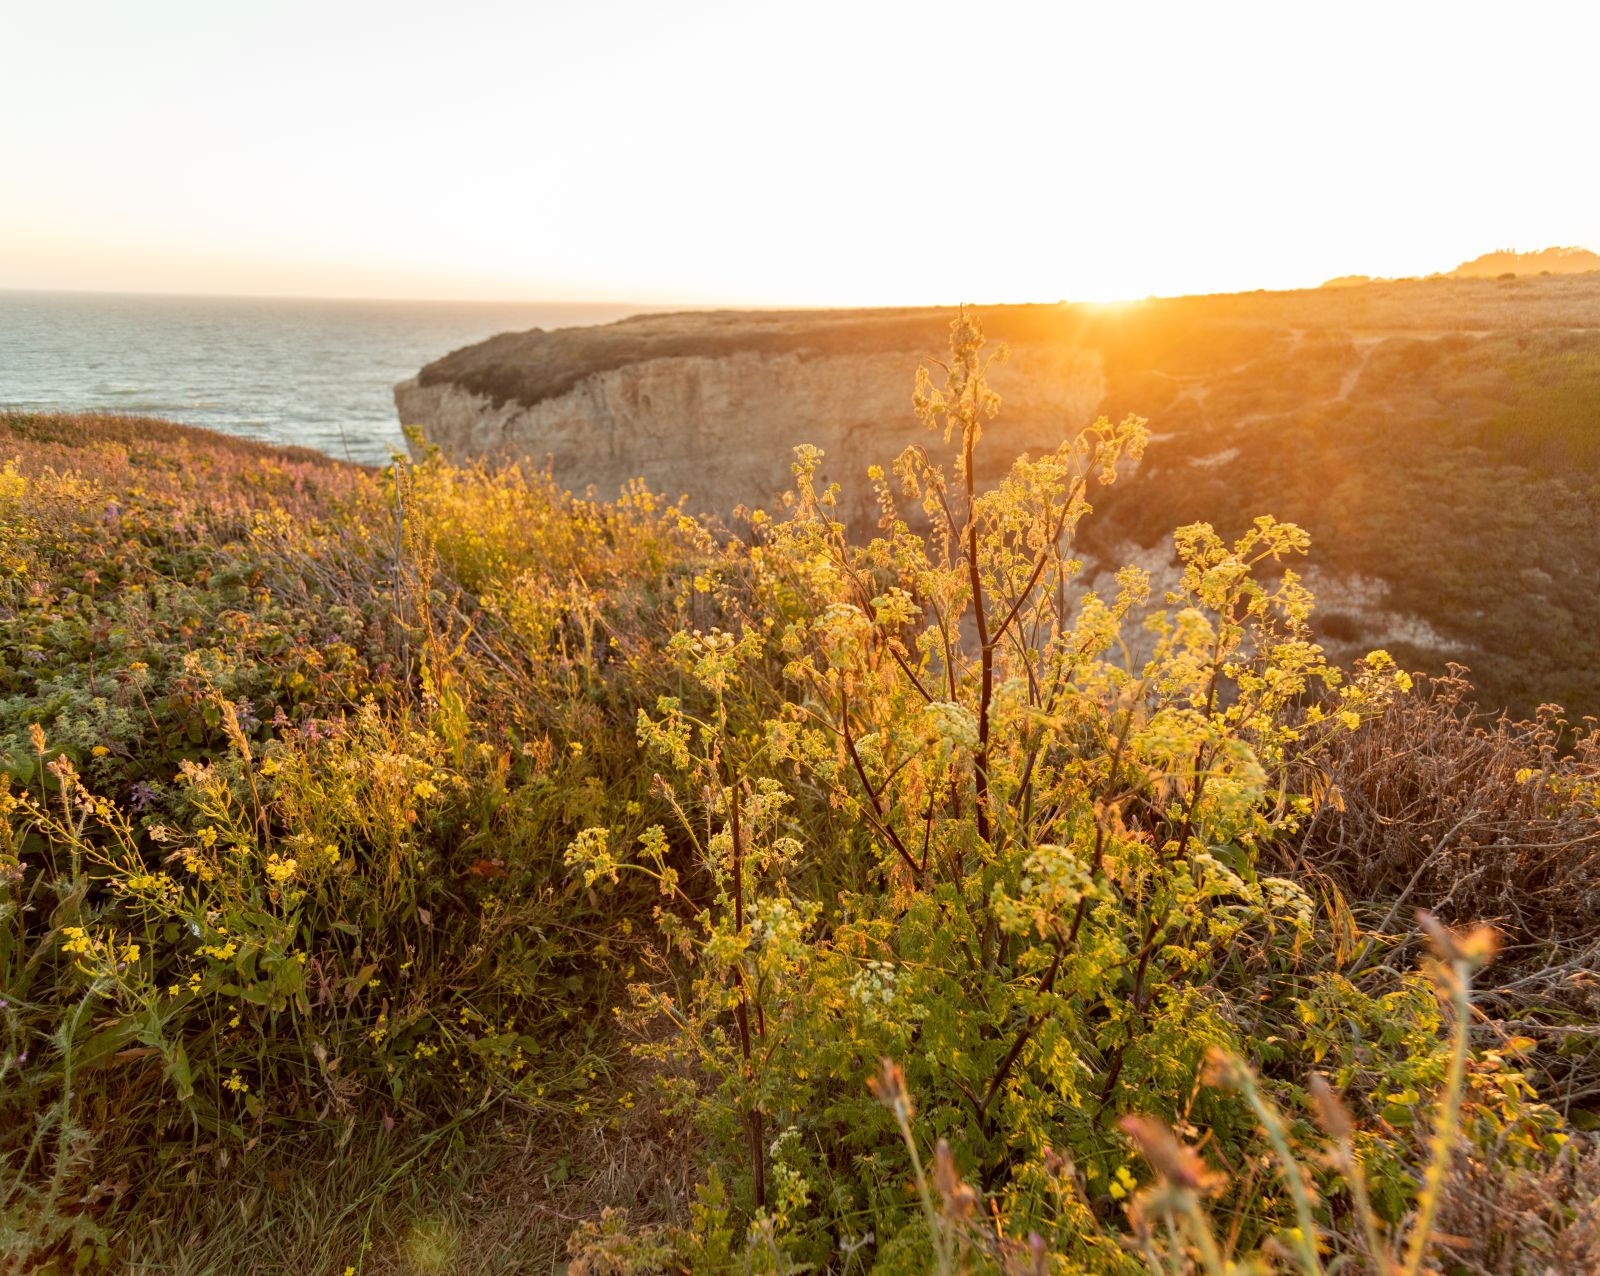 Plants growing on a bluff overlooking the ocean at sunset